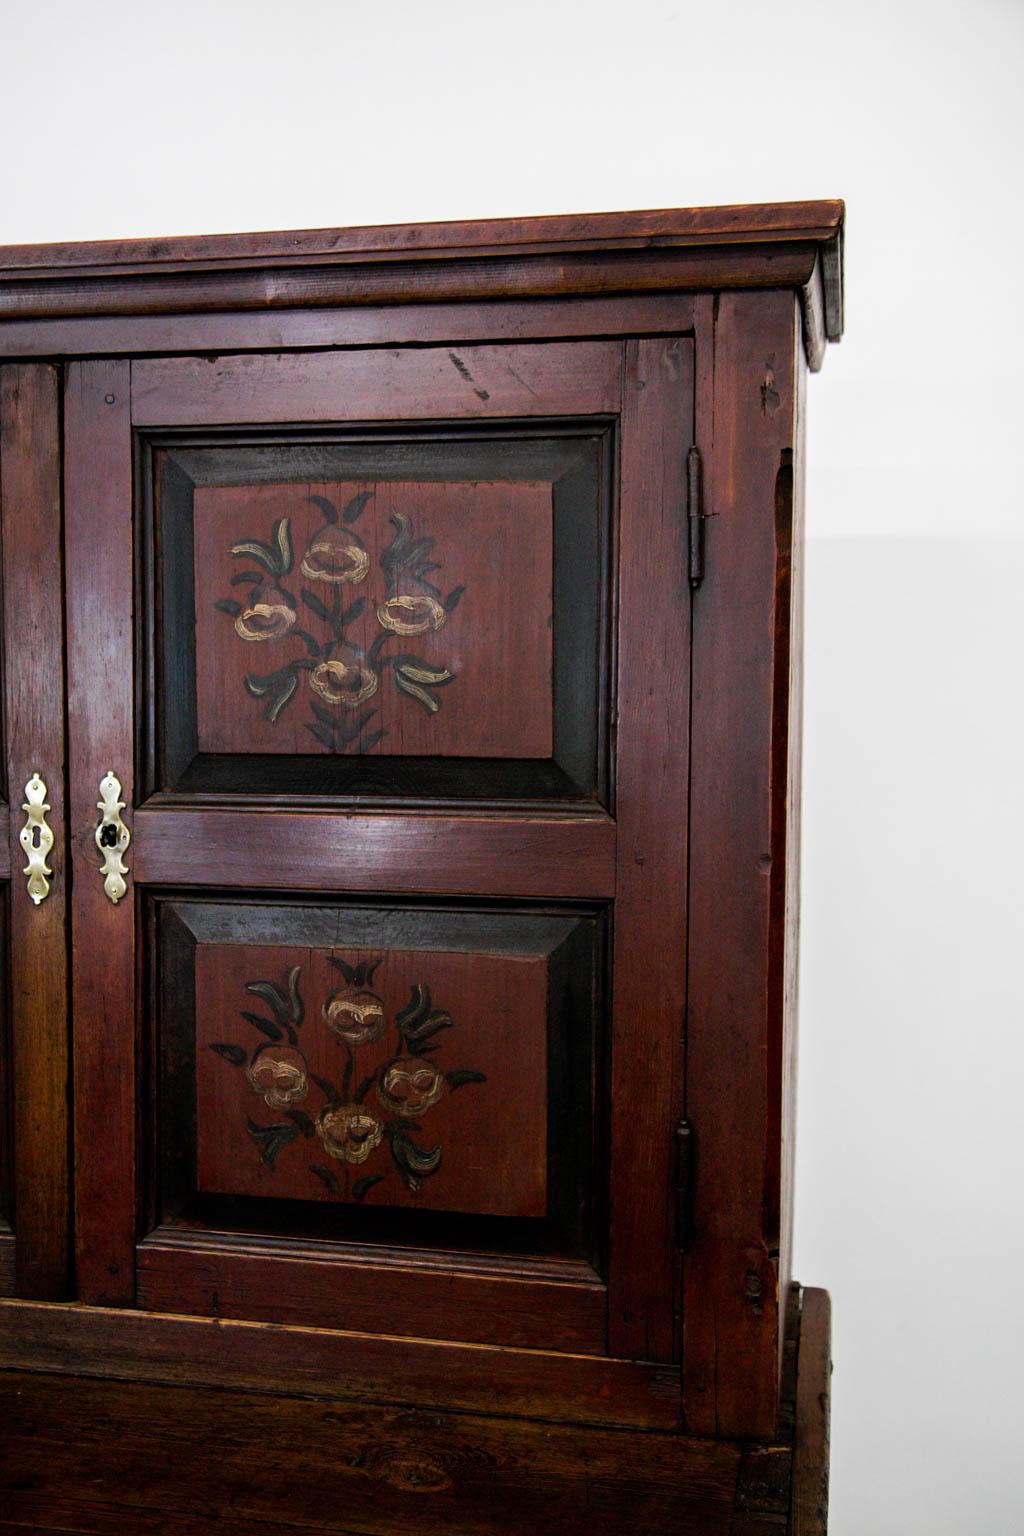 The top doors of this cupboard have four raised panels framed with shaped moldings. The top and bottom doors have a working lock and key. The upper doors have floral painting on the raised panels which have wear commensurate with age and use. There